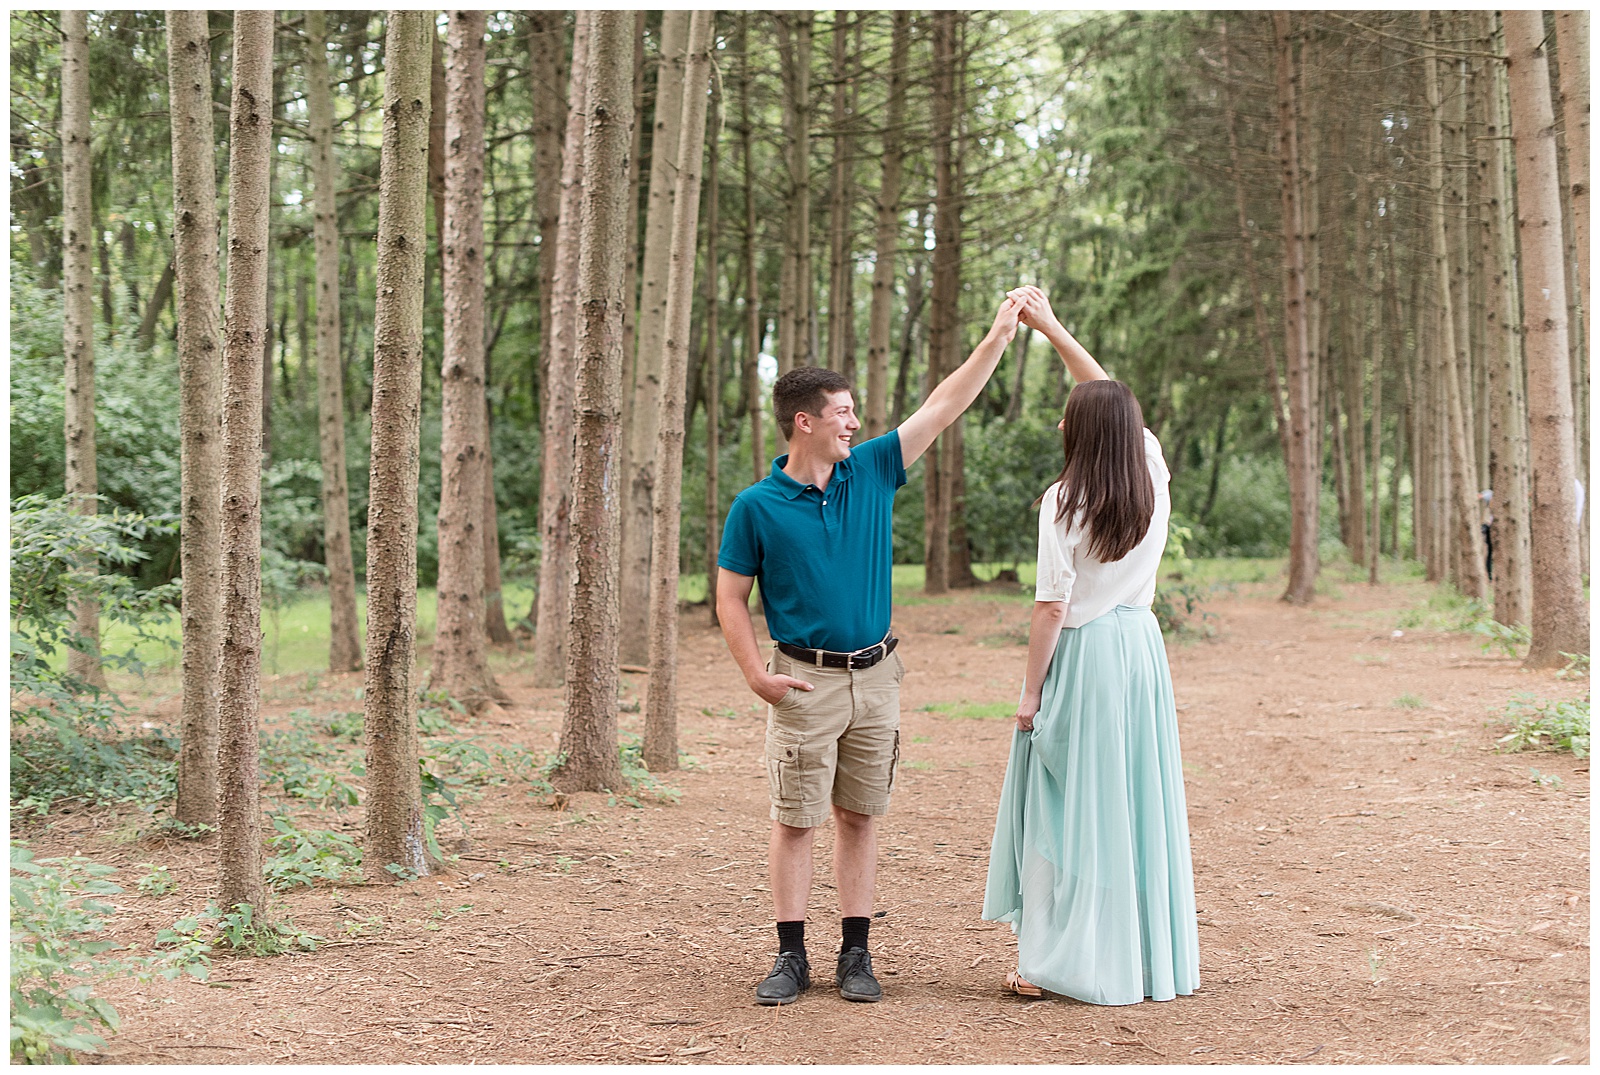 the couple is standing on a path in between rows of evergreen trees shading them and the guy is on the left with his right hand in his pocket and his left arm held high twirling the girl underneath their raised arms and he is looking towards the girl smiling and the girl's back is to the camera as her left hand is lightly grasping her mint green skirt at Overlook Park in Lancaster, PA